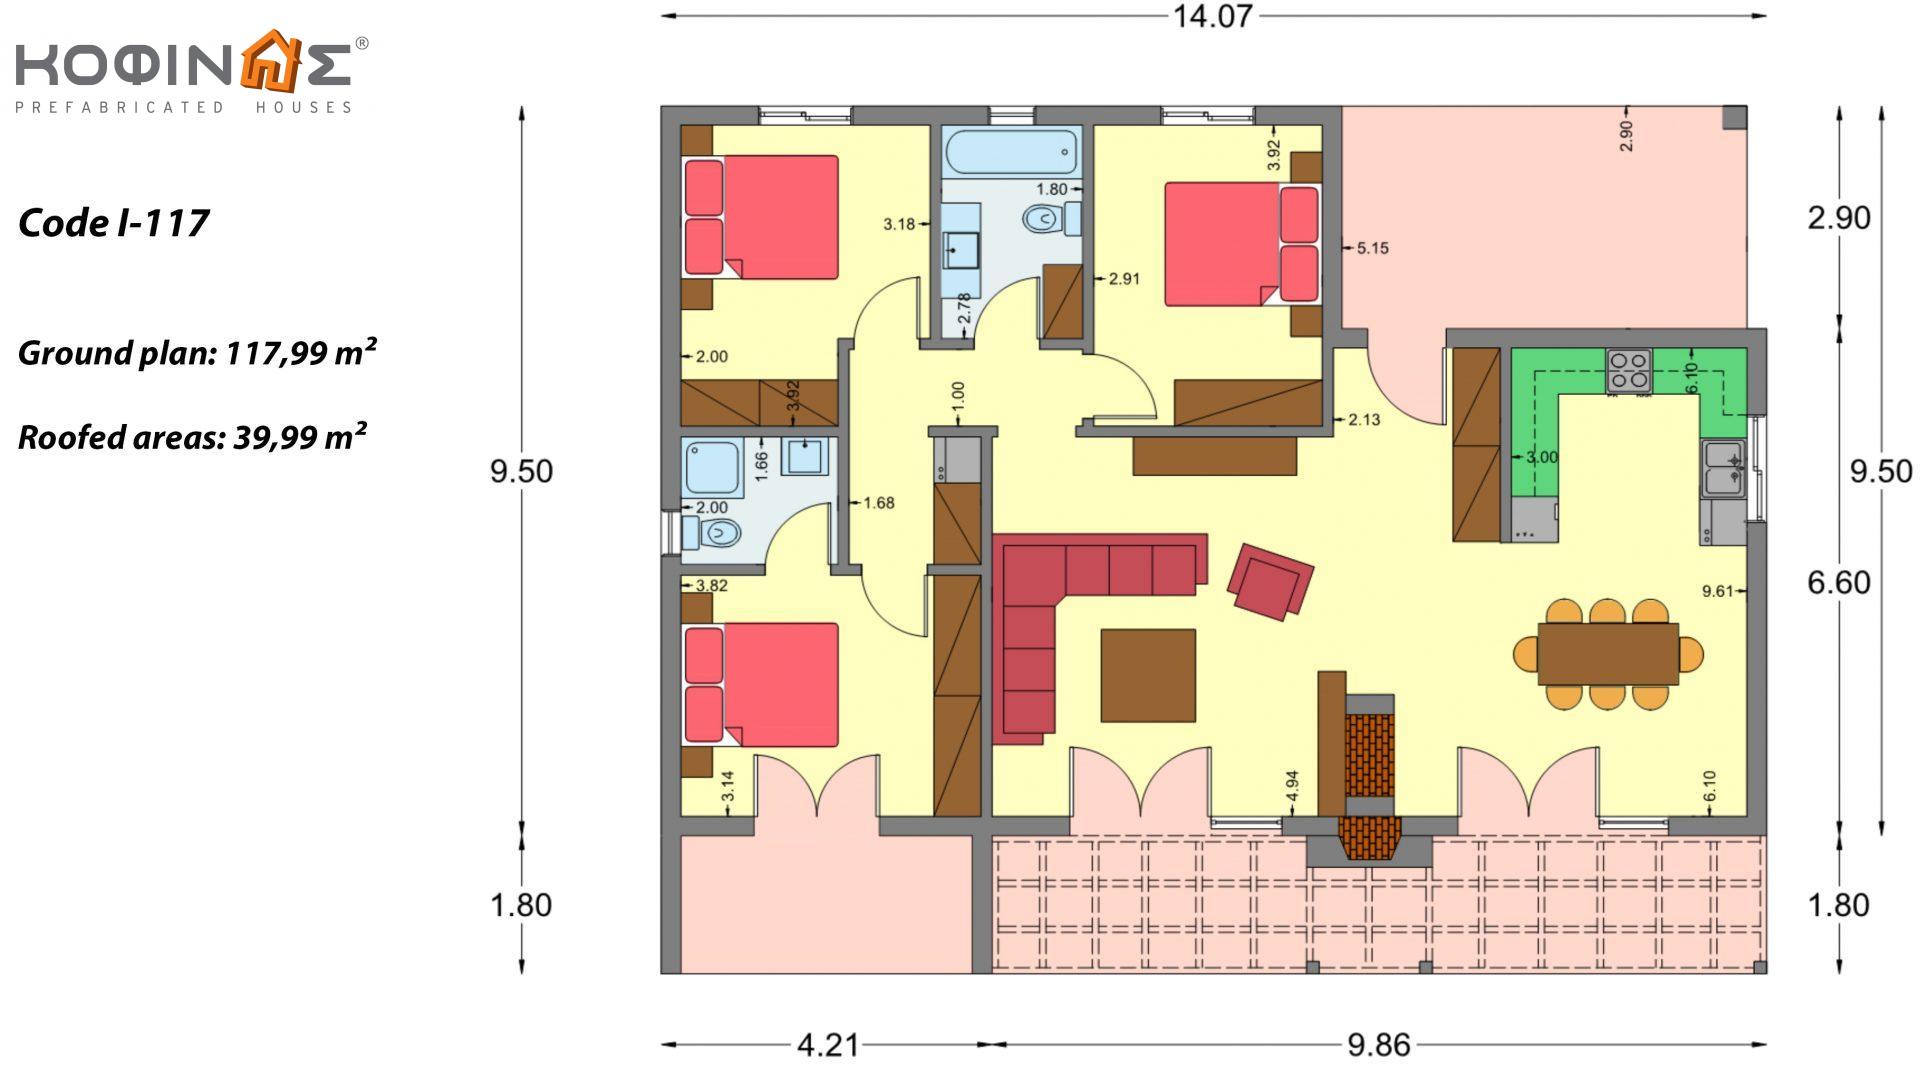 1-story house I-117, total surface of 117,99 m², covered roofed areas 39,99 m²